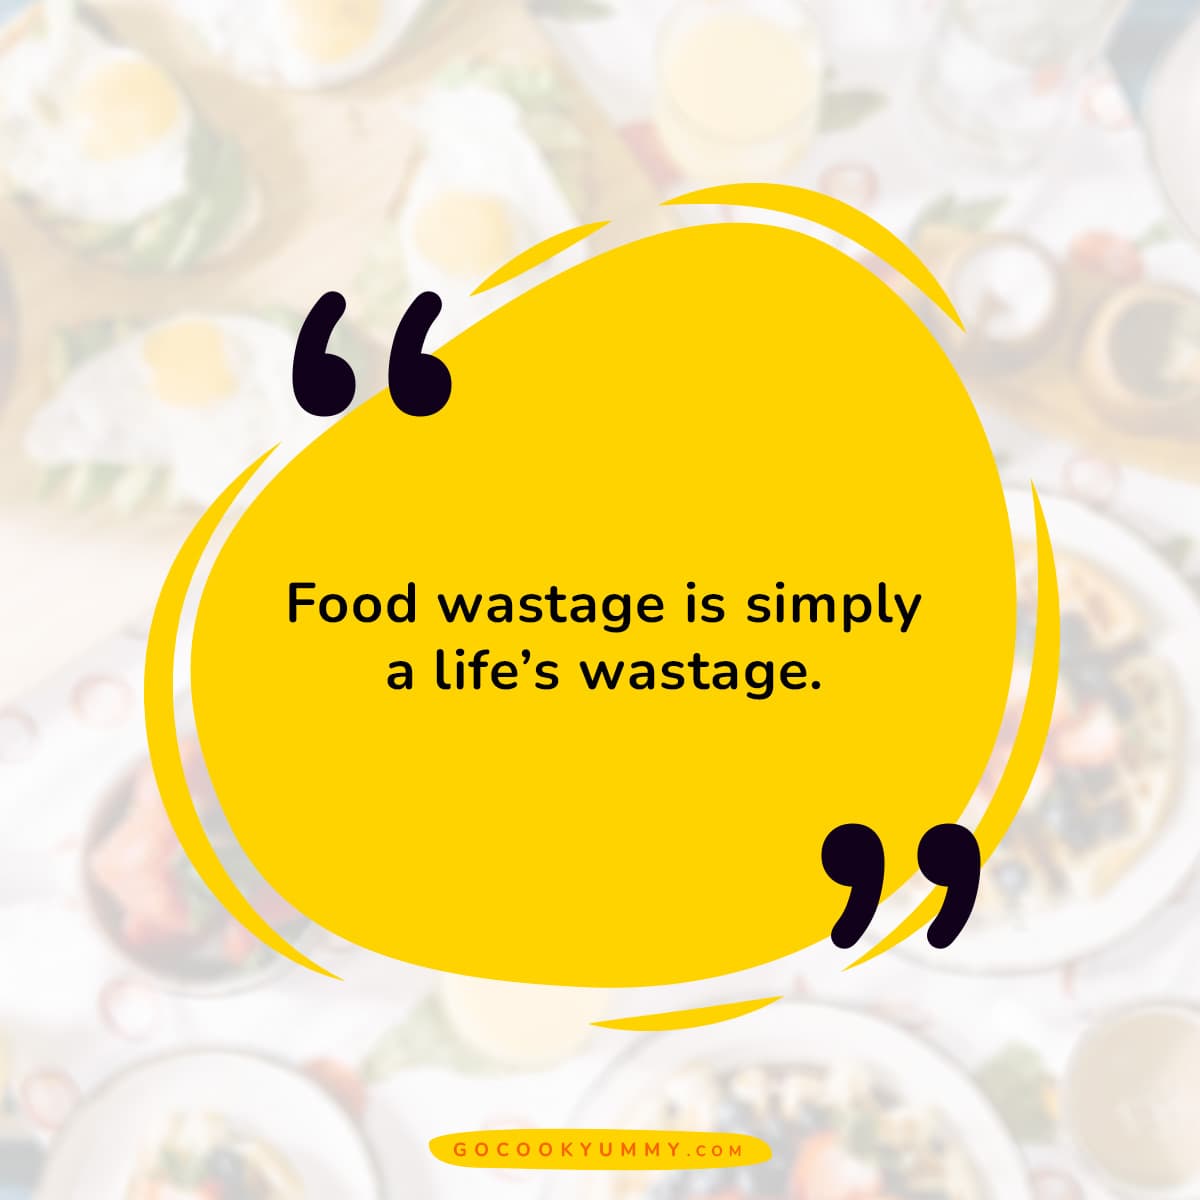 Food wastage is simply a life's wastage.